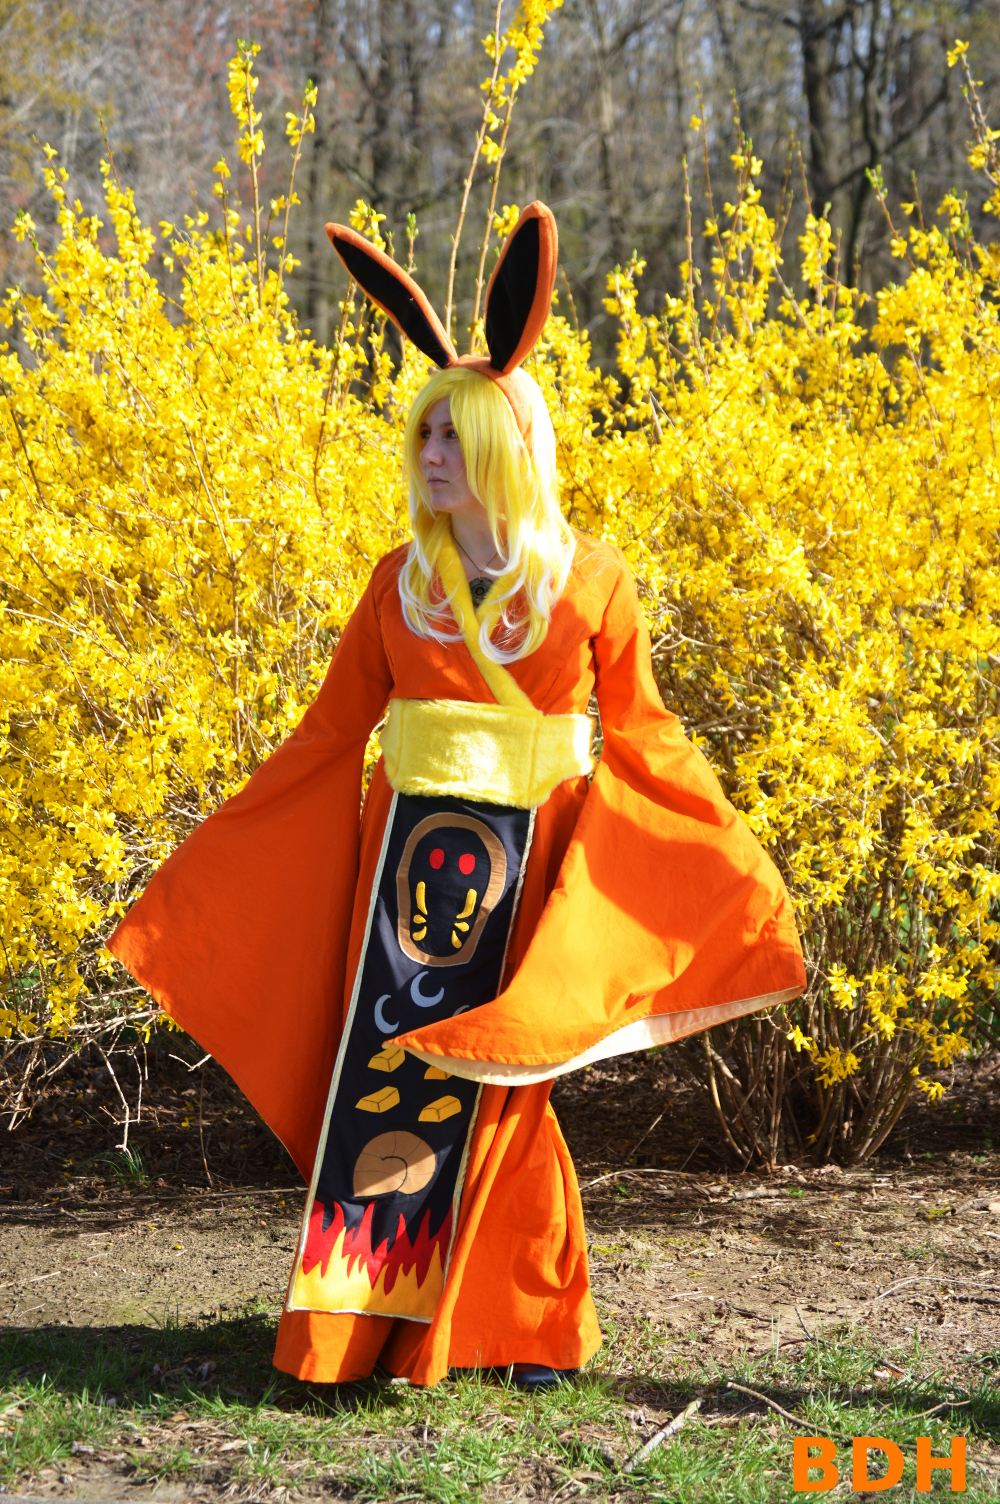 Flareon cosplay involving an orange gown with bell sleeves, long orange ears, and a banner depicting Kabuto and other TPP symbols.